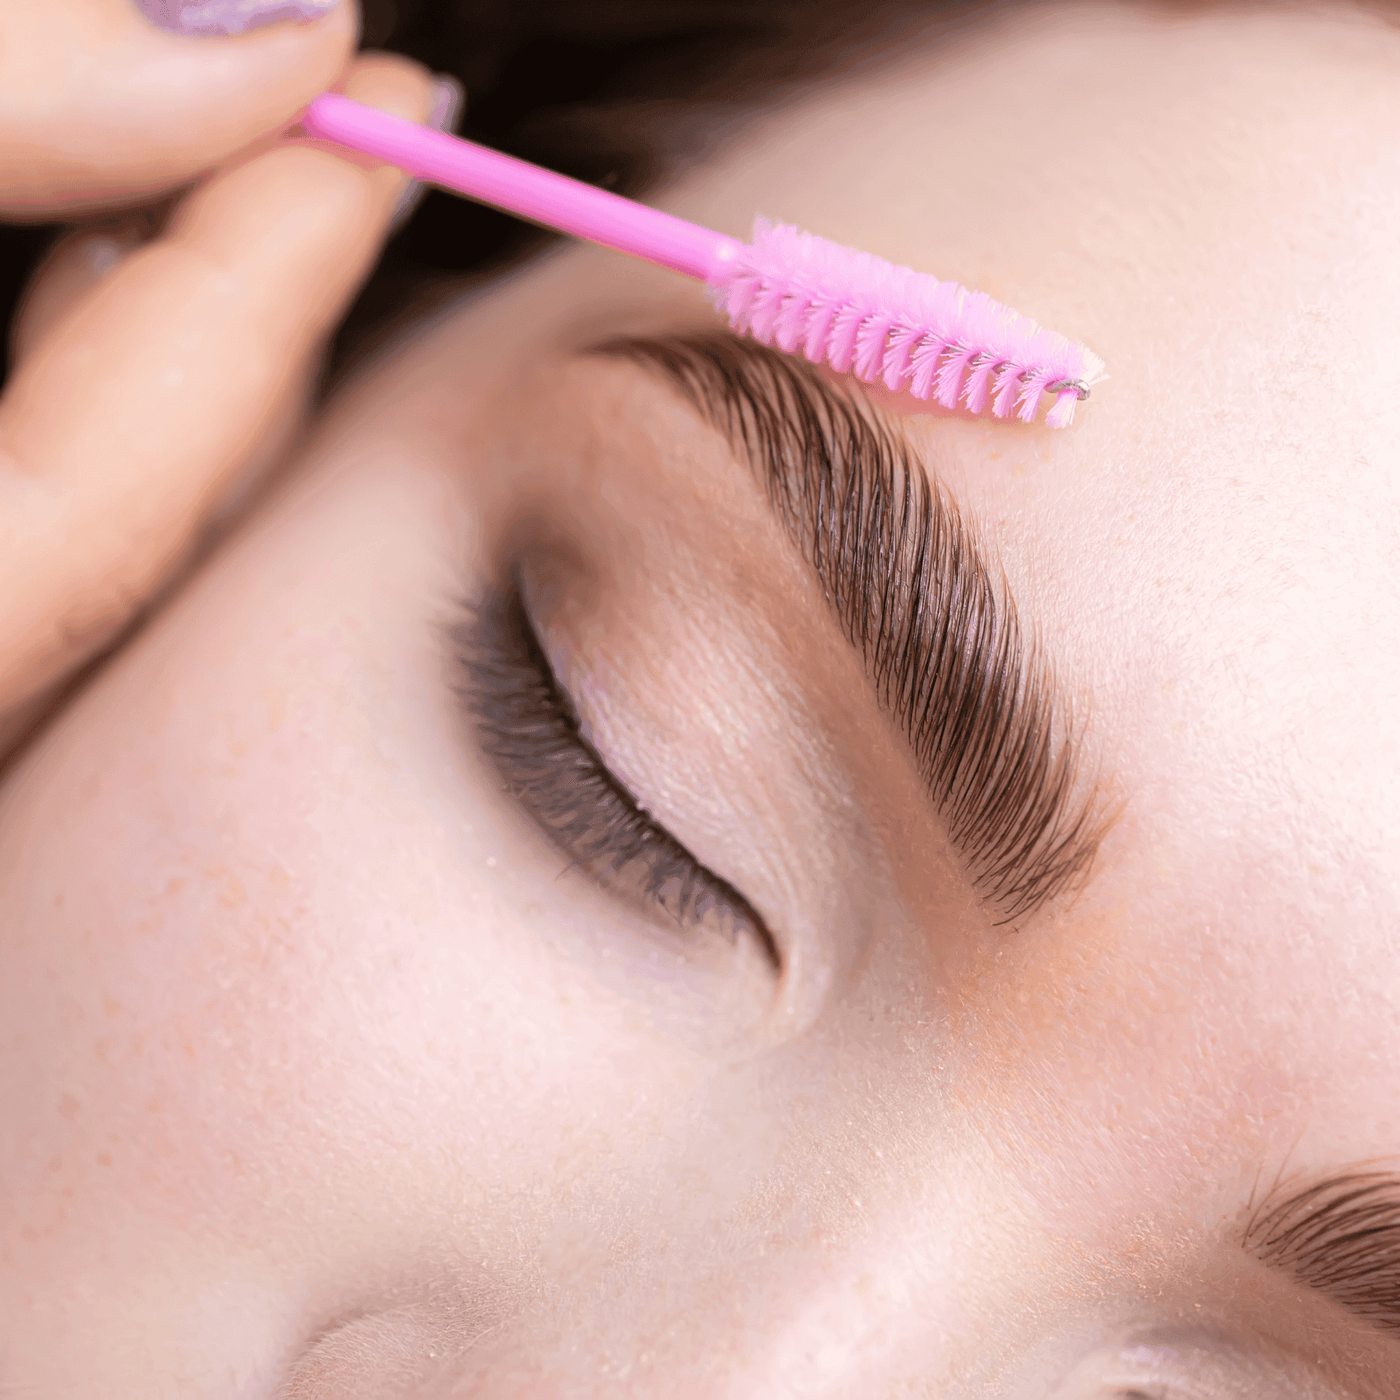 Brow Lamination Course - East Sussex Venue - The London Brow Company